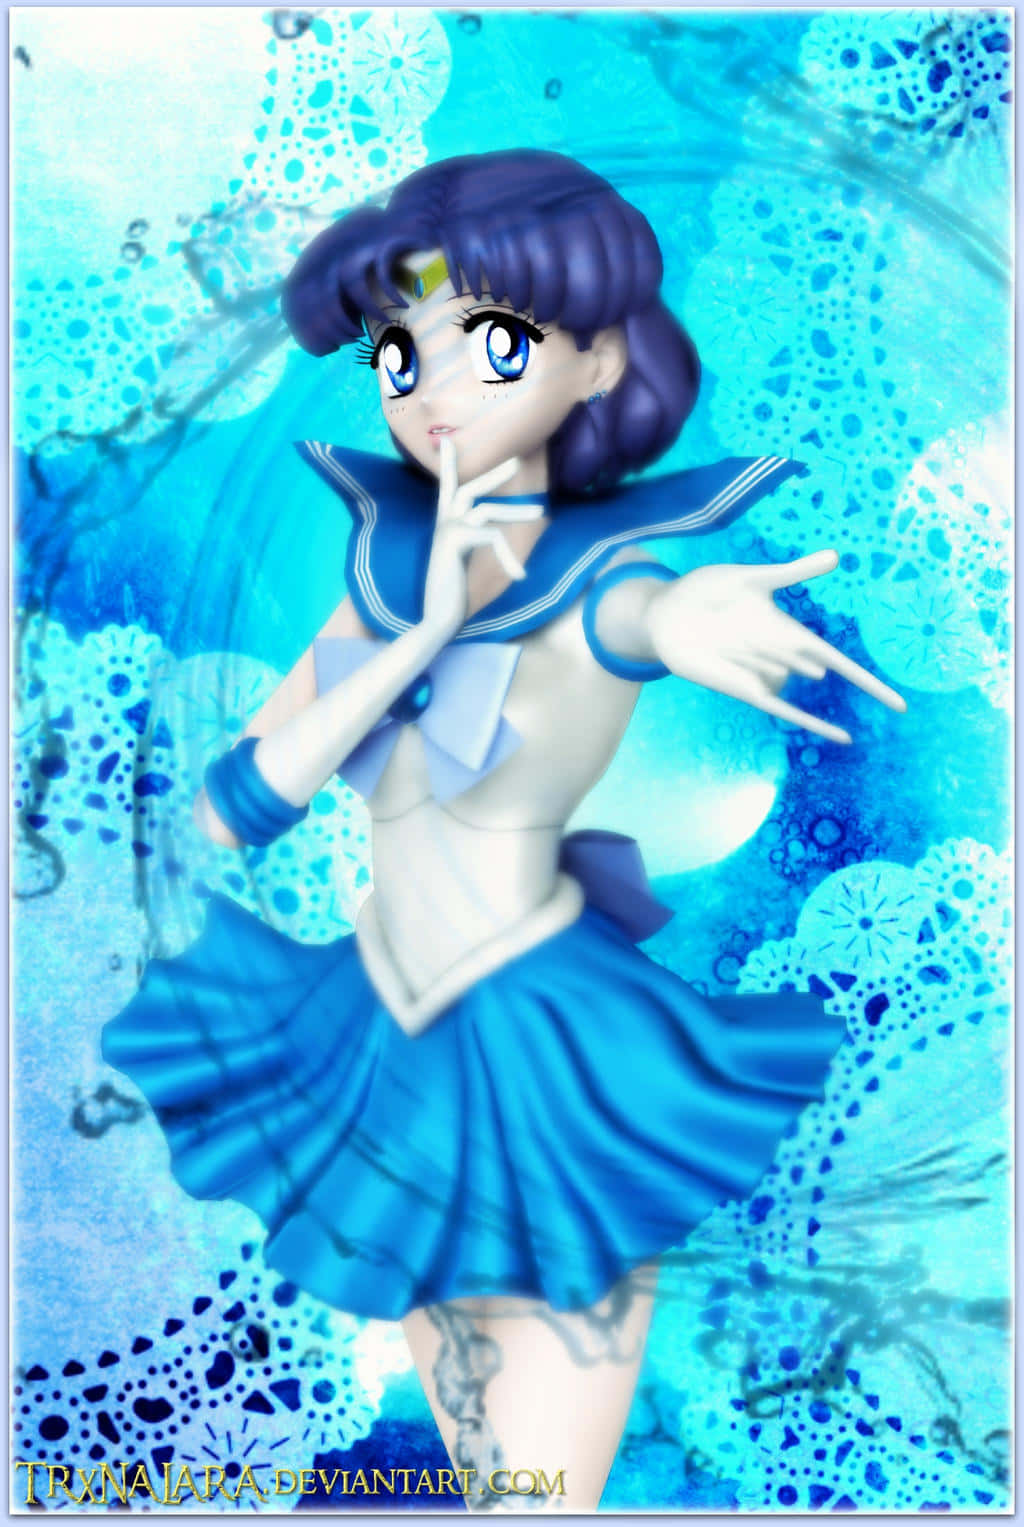 Sailor Mercury using her power to protect the world. Wallpaper